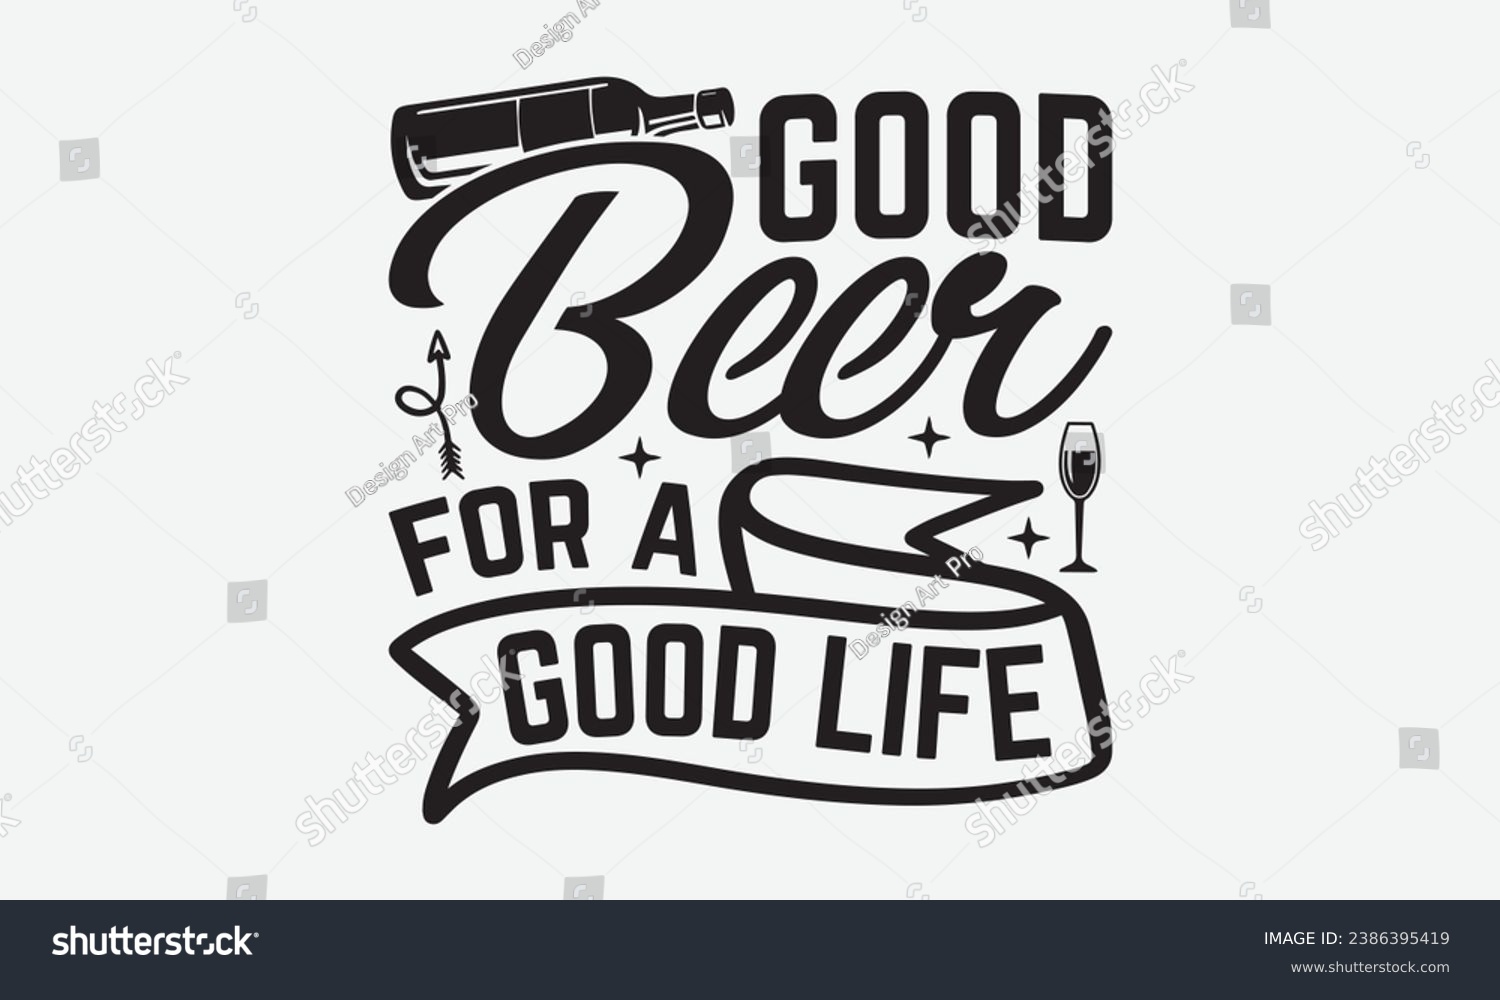 SVG of Good Beer For A Good Life -Beer T-Shirt Design, Vintage Calligraphy Design, With Notebooks, Wall, Stickers, Mugs And Others Print, Vector Files Are Editable. svg